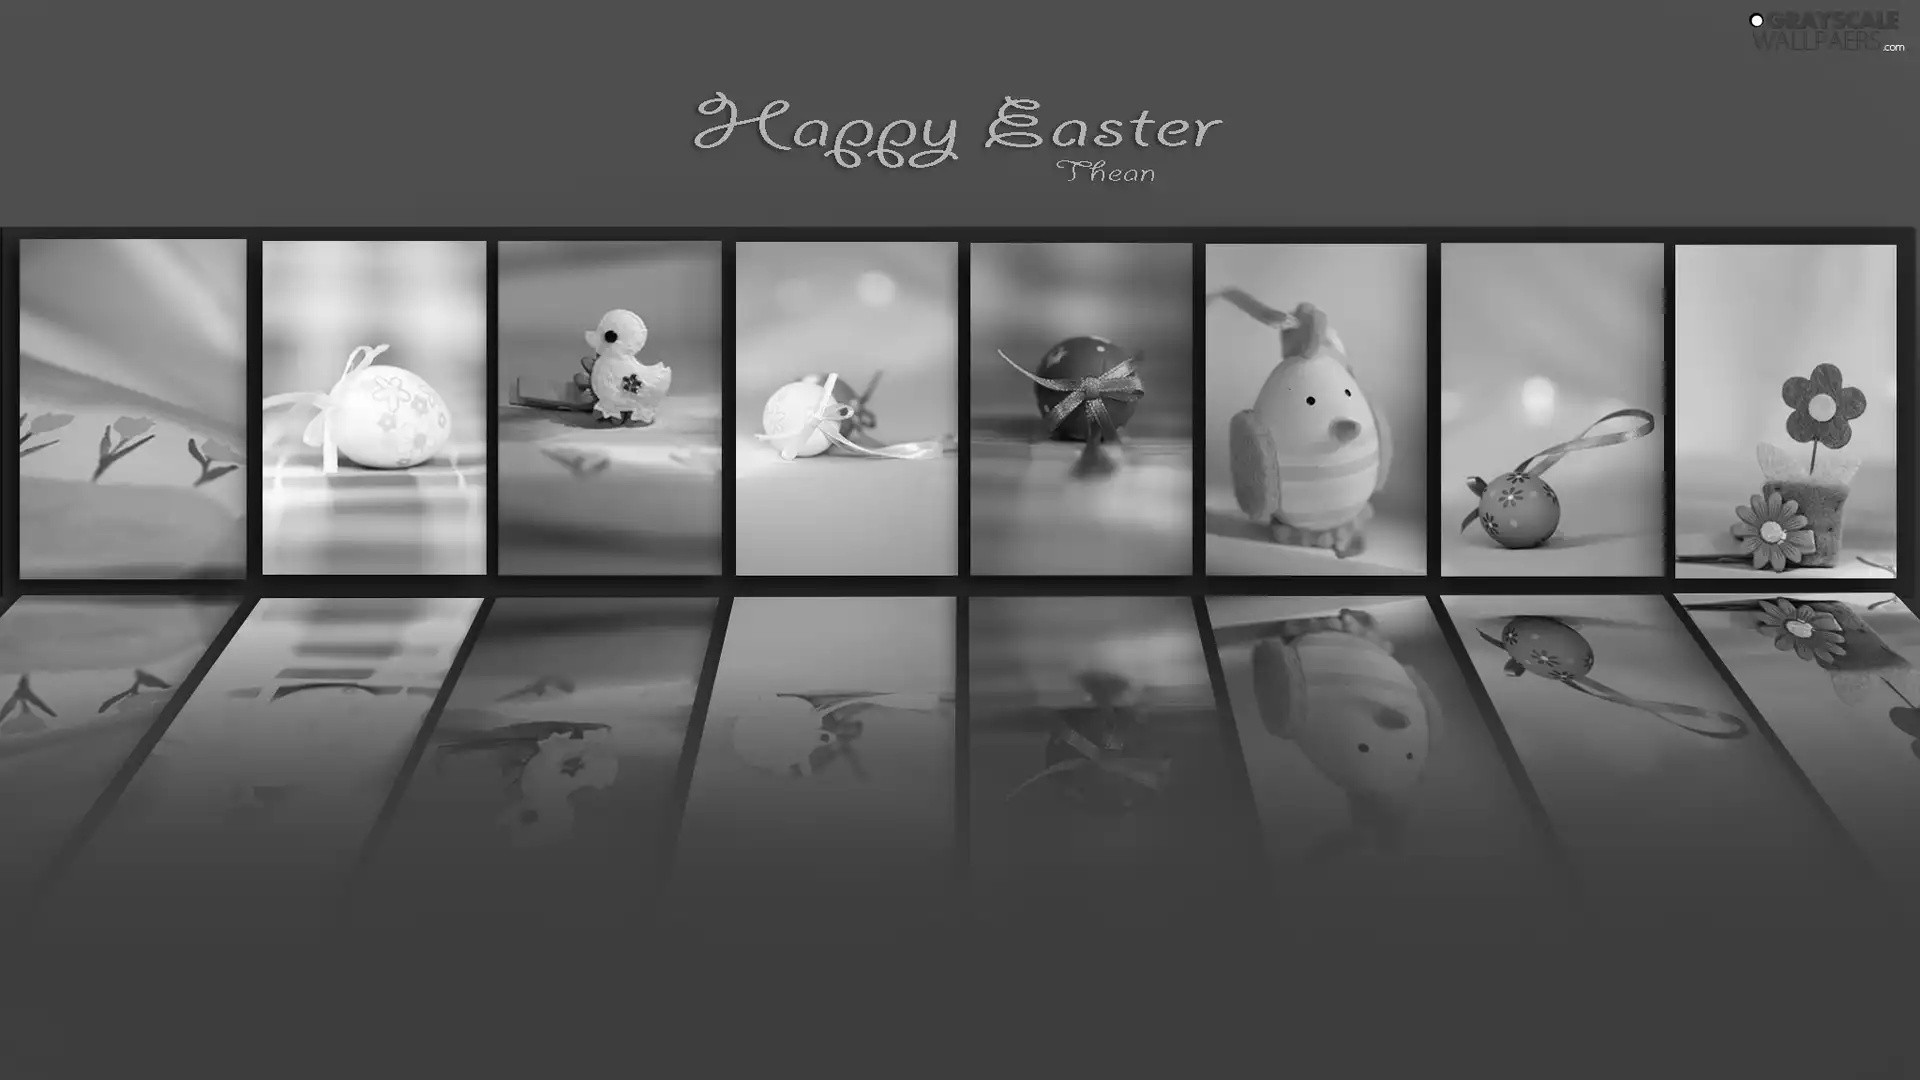 pictures, reflection, christmas, ornamentation, Easter